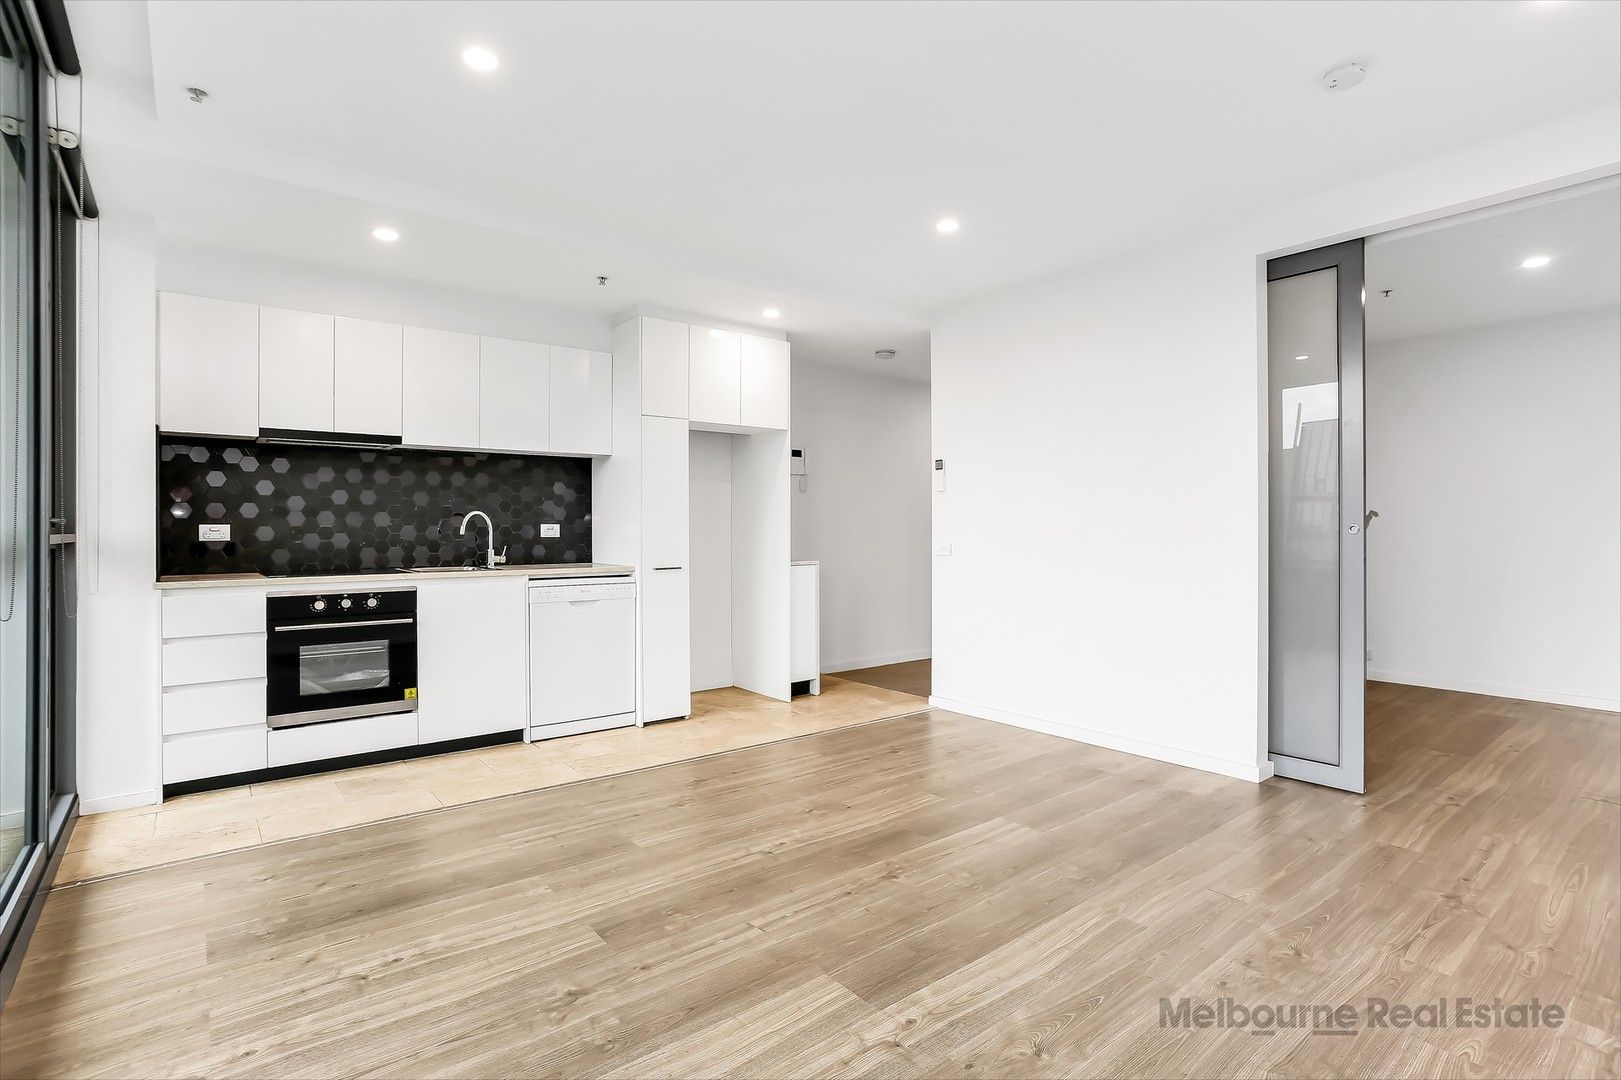 1 bedrooms House in 1510/8 Downie Street MELBOURNE VIC, 3000